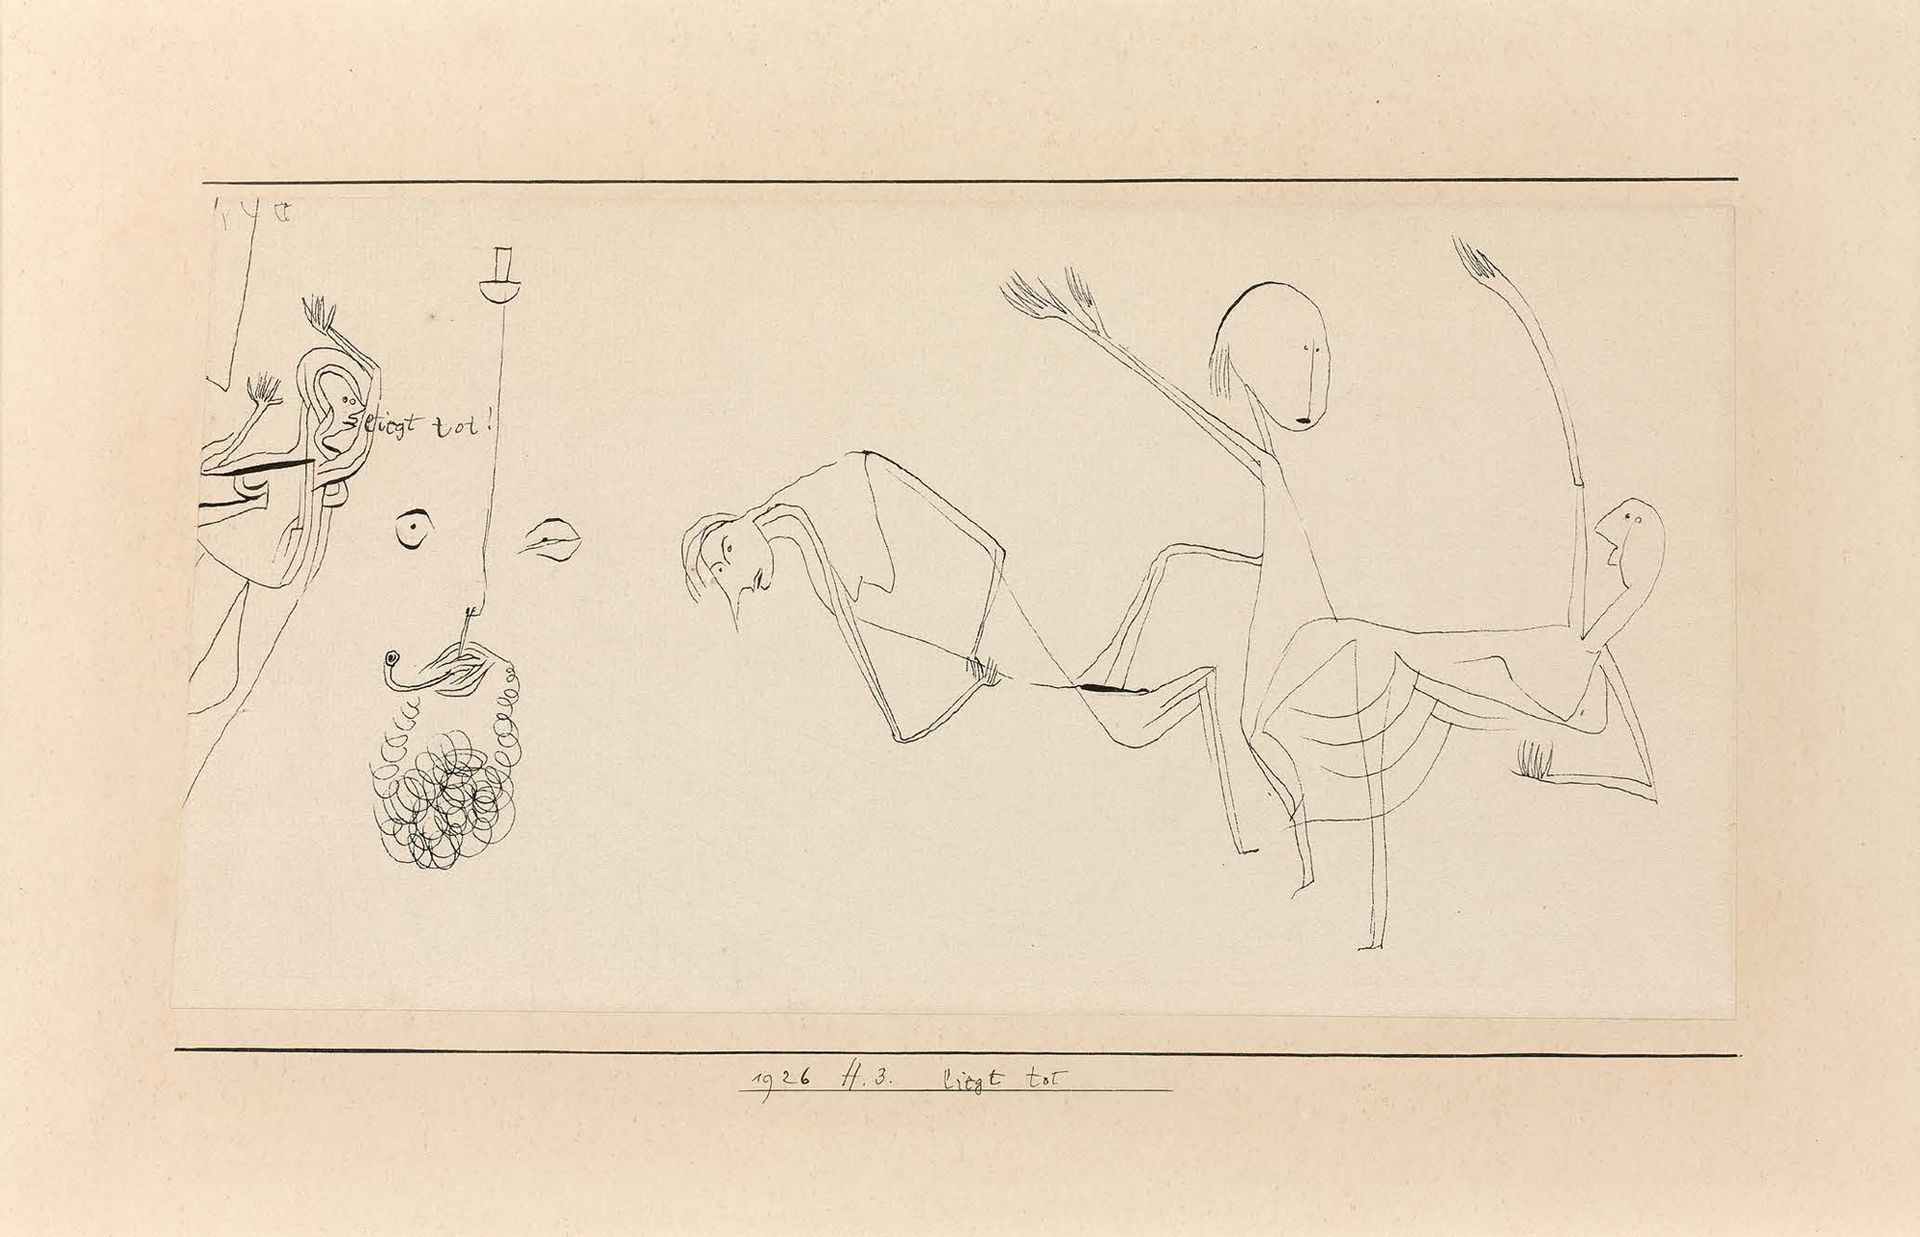 Paul Klee (1879-1940) Liegt tot, 1926, 173 (H3)
Ink on paper pasted on board, si&hellip;